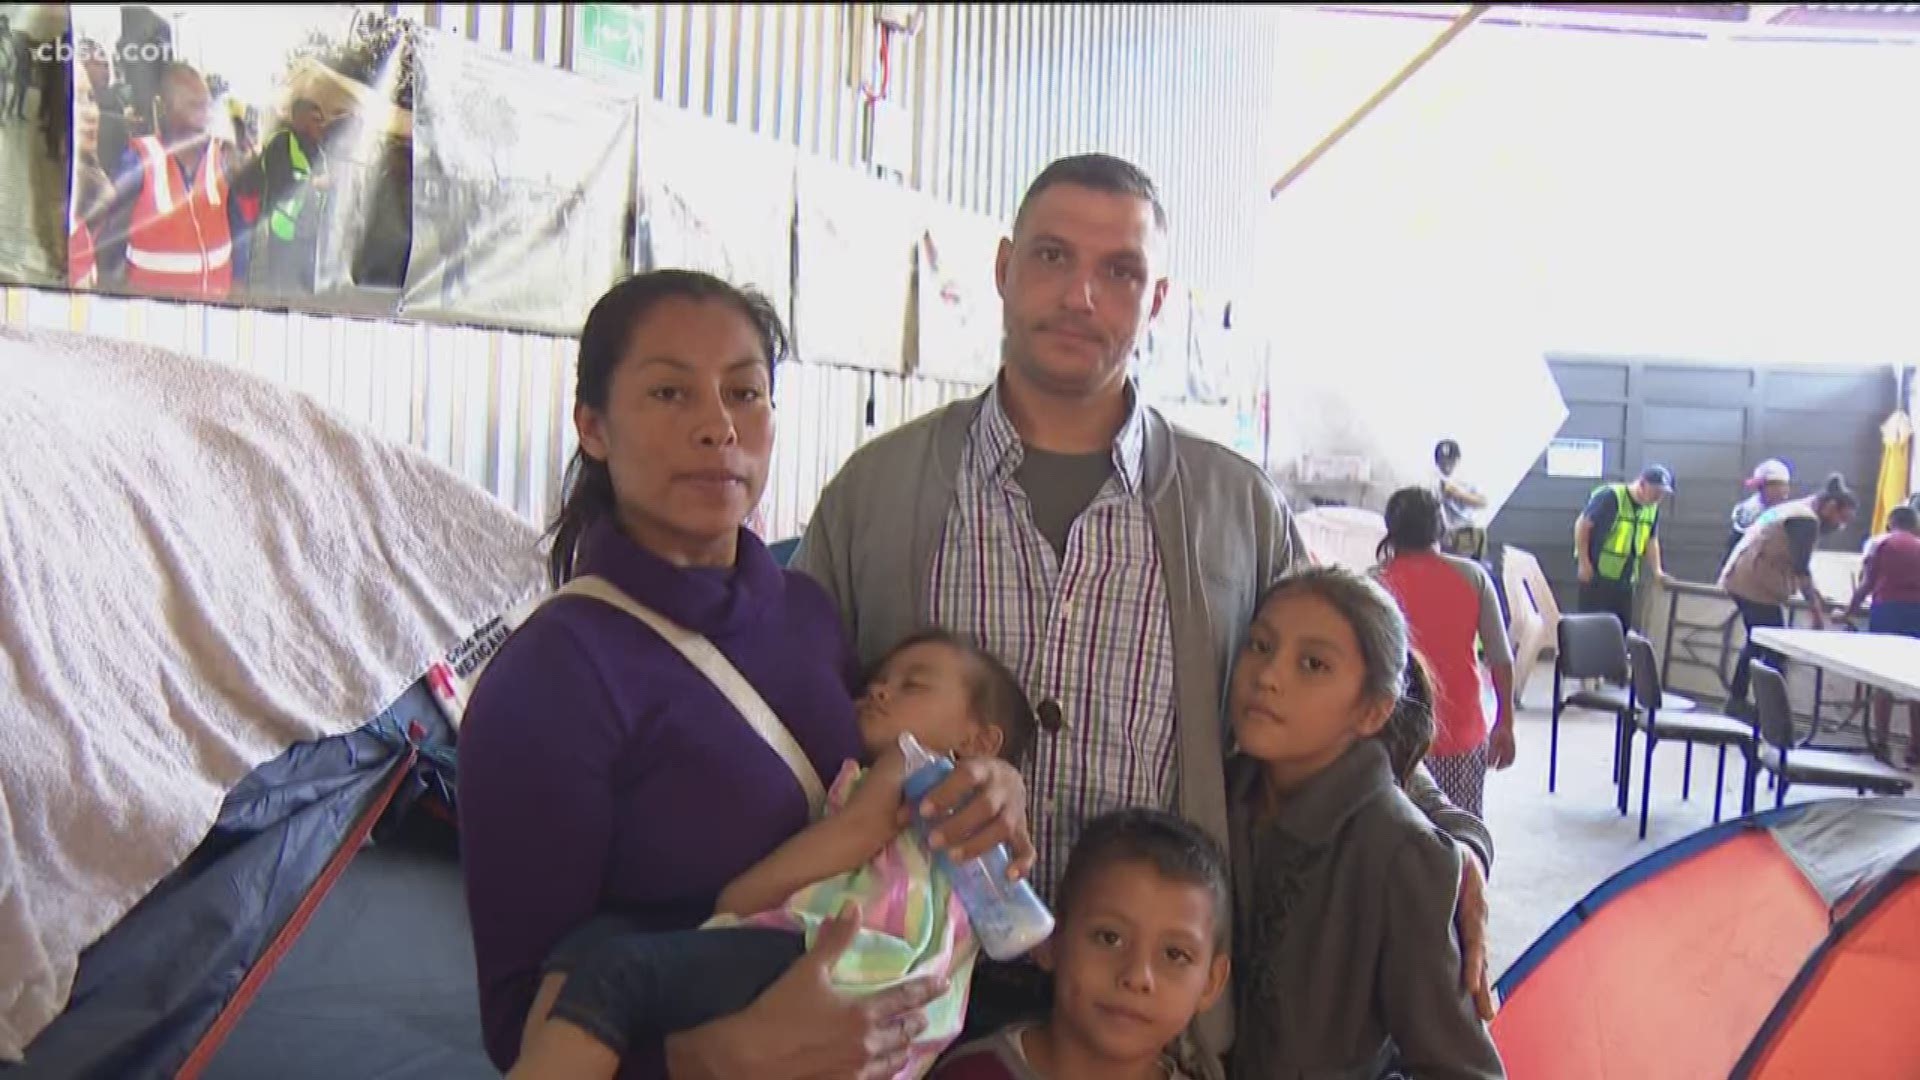 The family appeared last week in a News 8 special report, Beyond the Border.